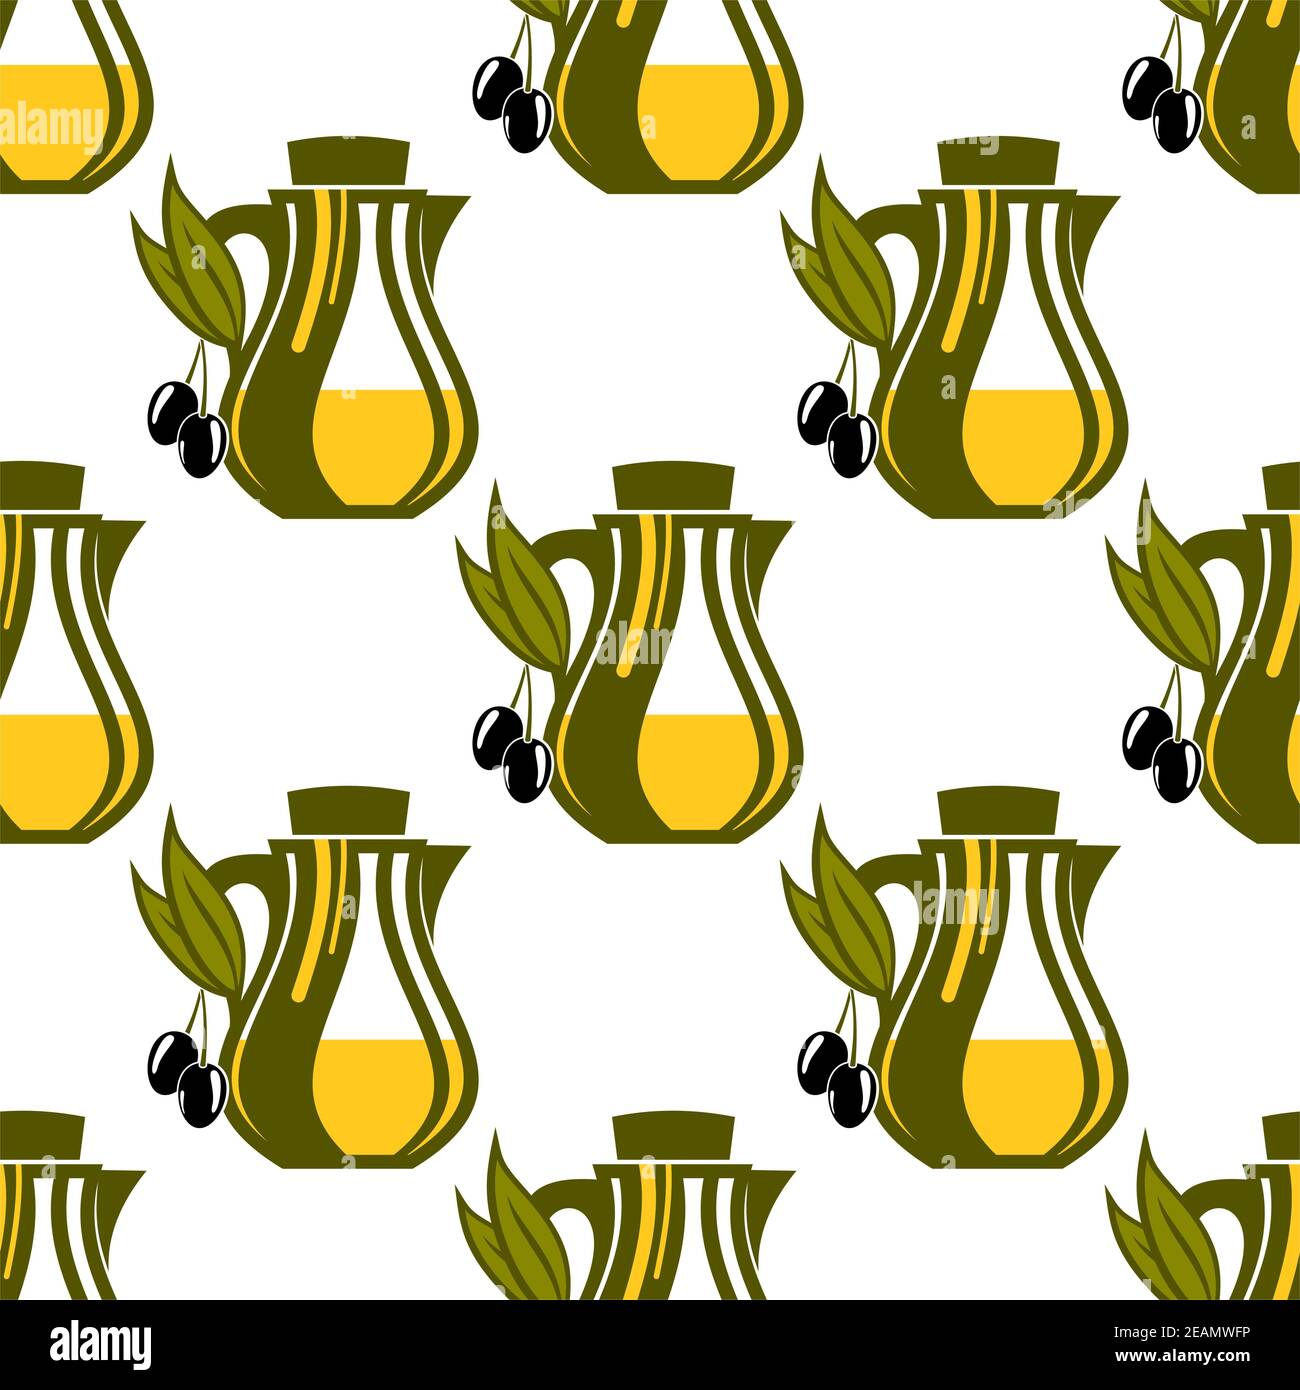 Seamless pattern of olive oil decanters in green and yellow with ripe olives hanging from the handle, repeat motif cartoon vector illustration on whit Stock Vector